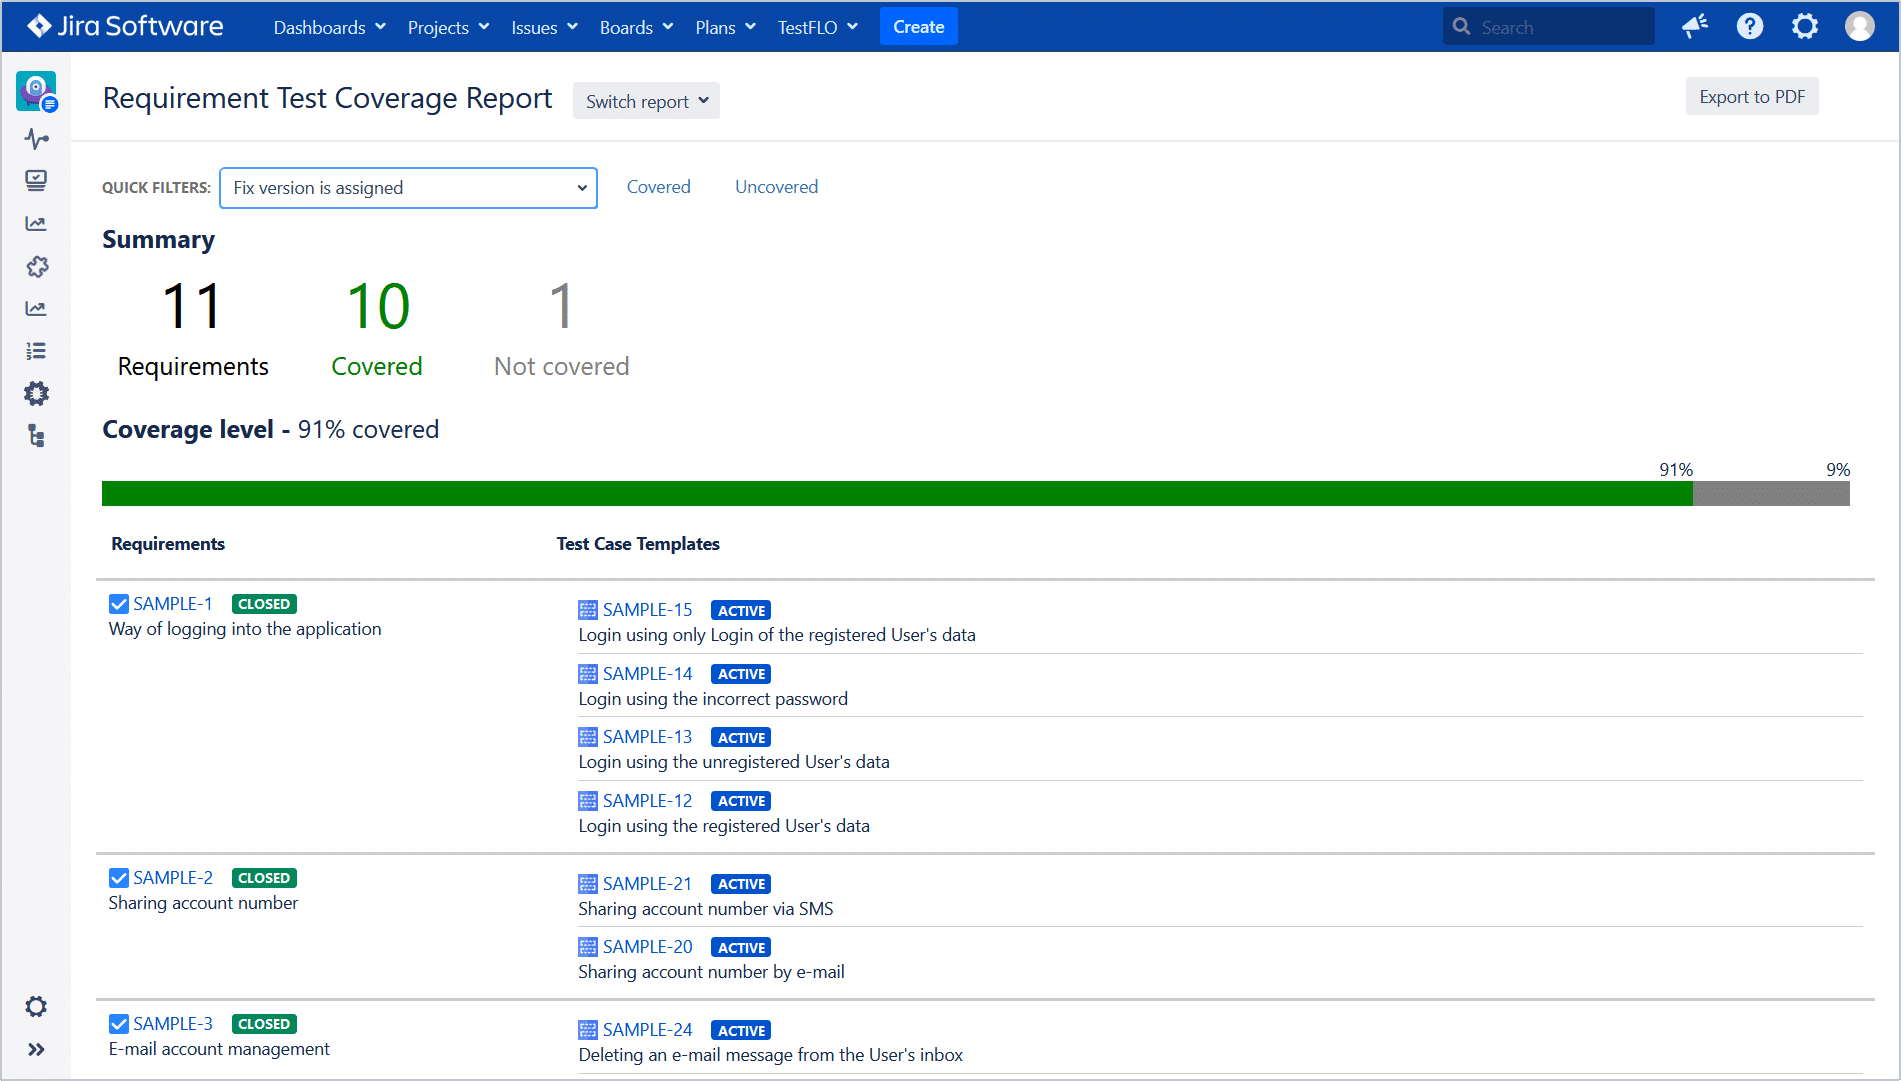 Screen view of a Jira Software with the Summary and tasks list